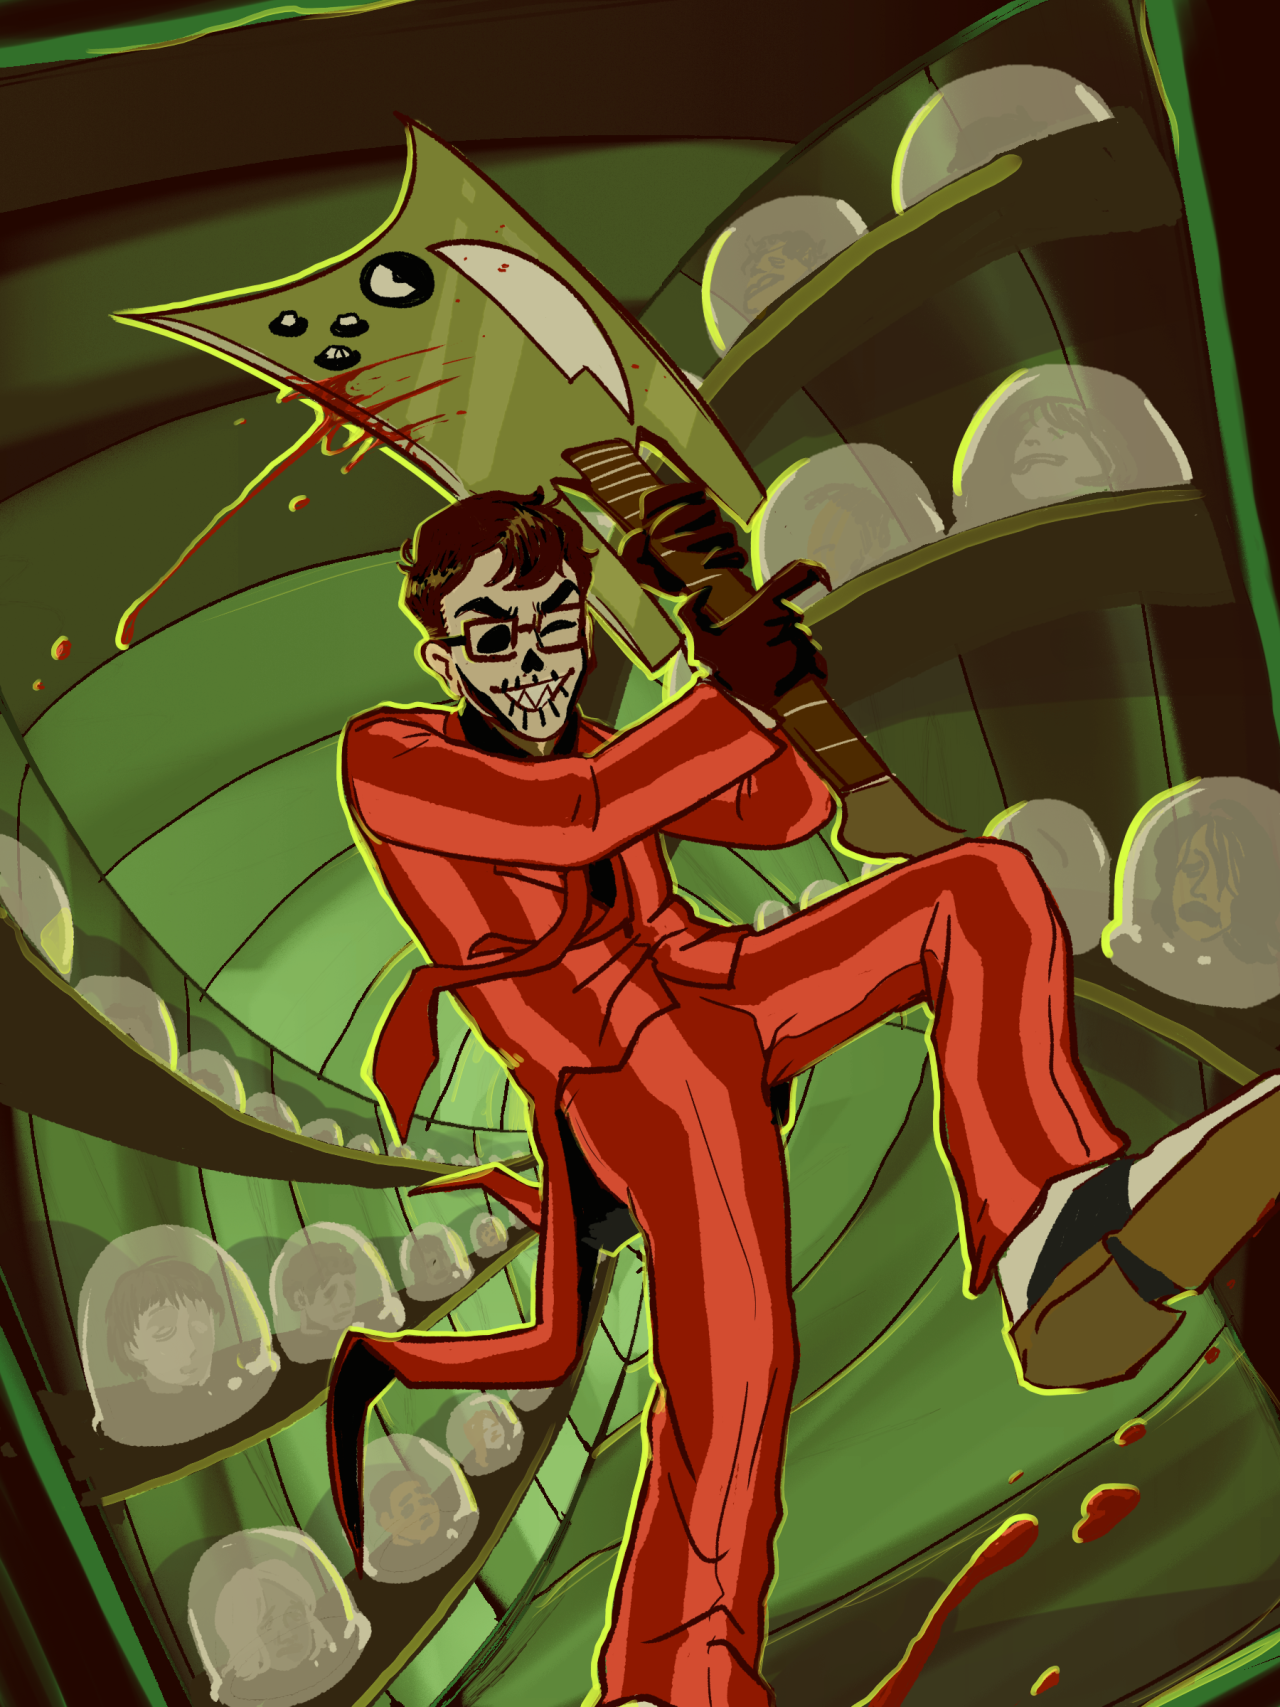 A man in a red striped suit with a skeletal face swings a guitar like an axe. Behind him is a twisting hall of severed heads on display.